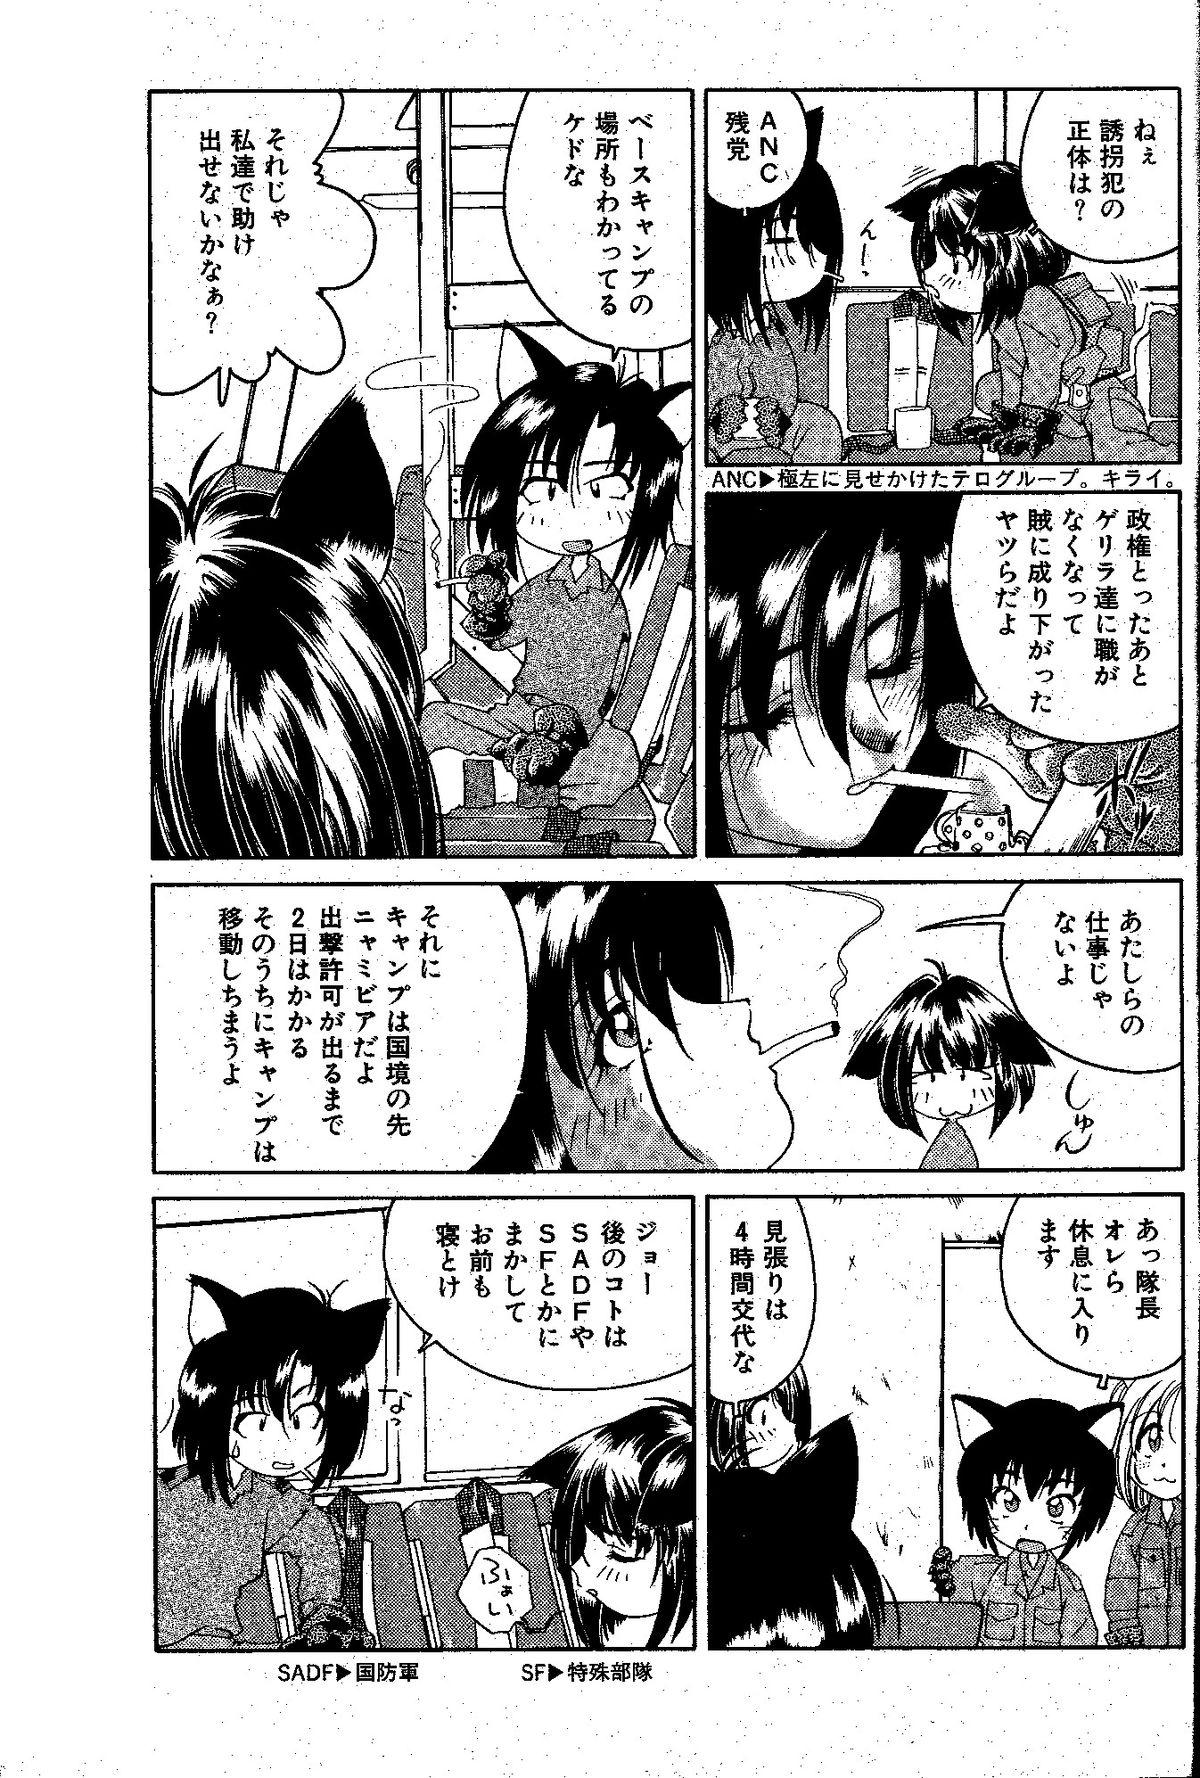 nyan-a-kore [Last page has imperfect lines] 4